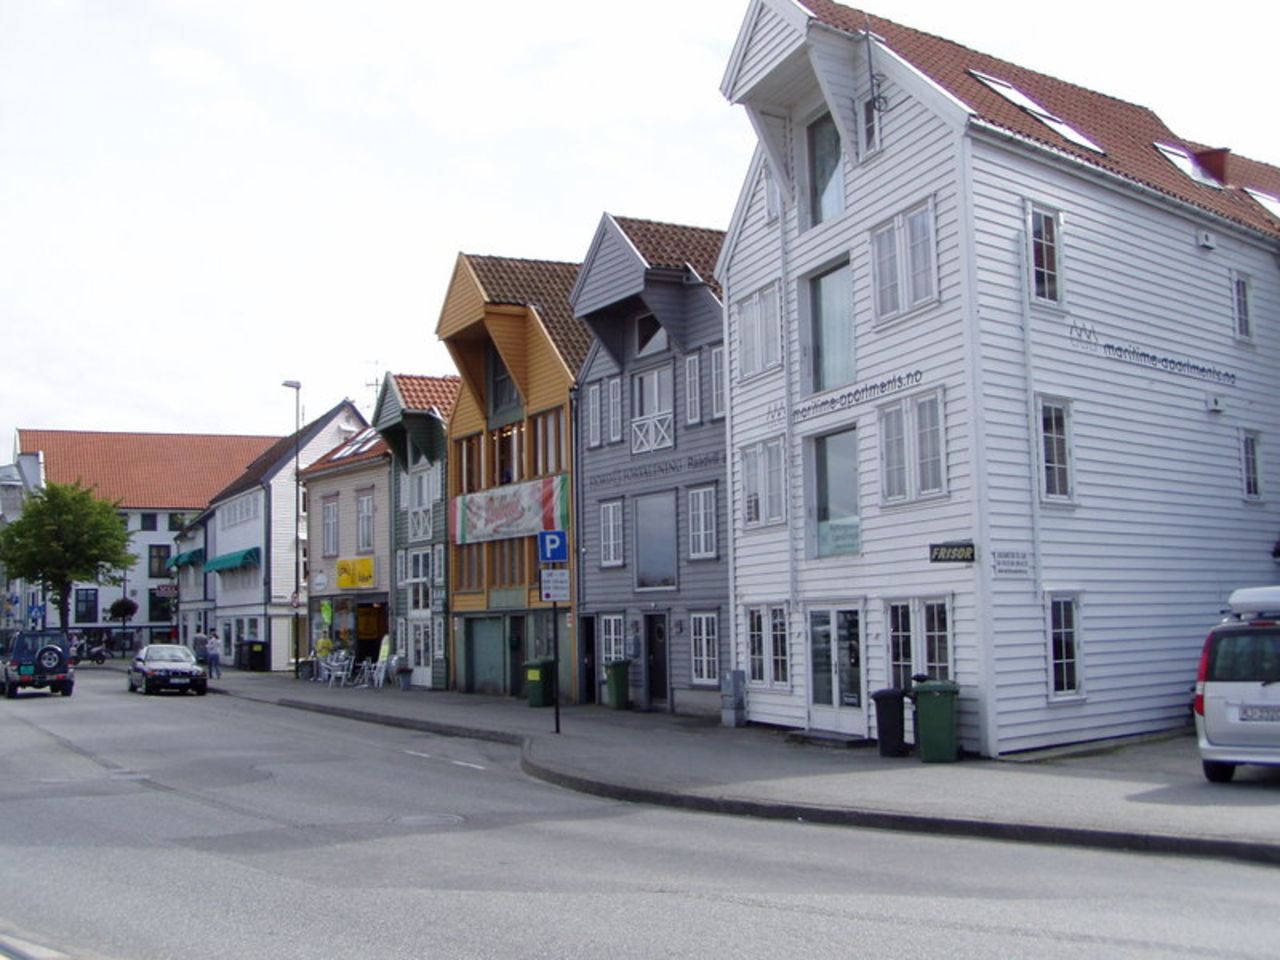 Stavanger, on the southern coast of Norway, is the world's third most expensive city for expats, says ECA, rising two notches from 2012. The city is often referred to as the Oil Capital of Norway. The country's energy company Statoil is also based here. 